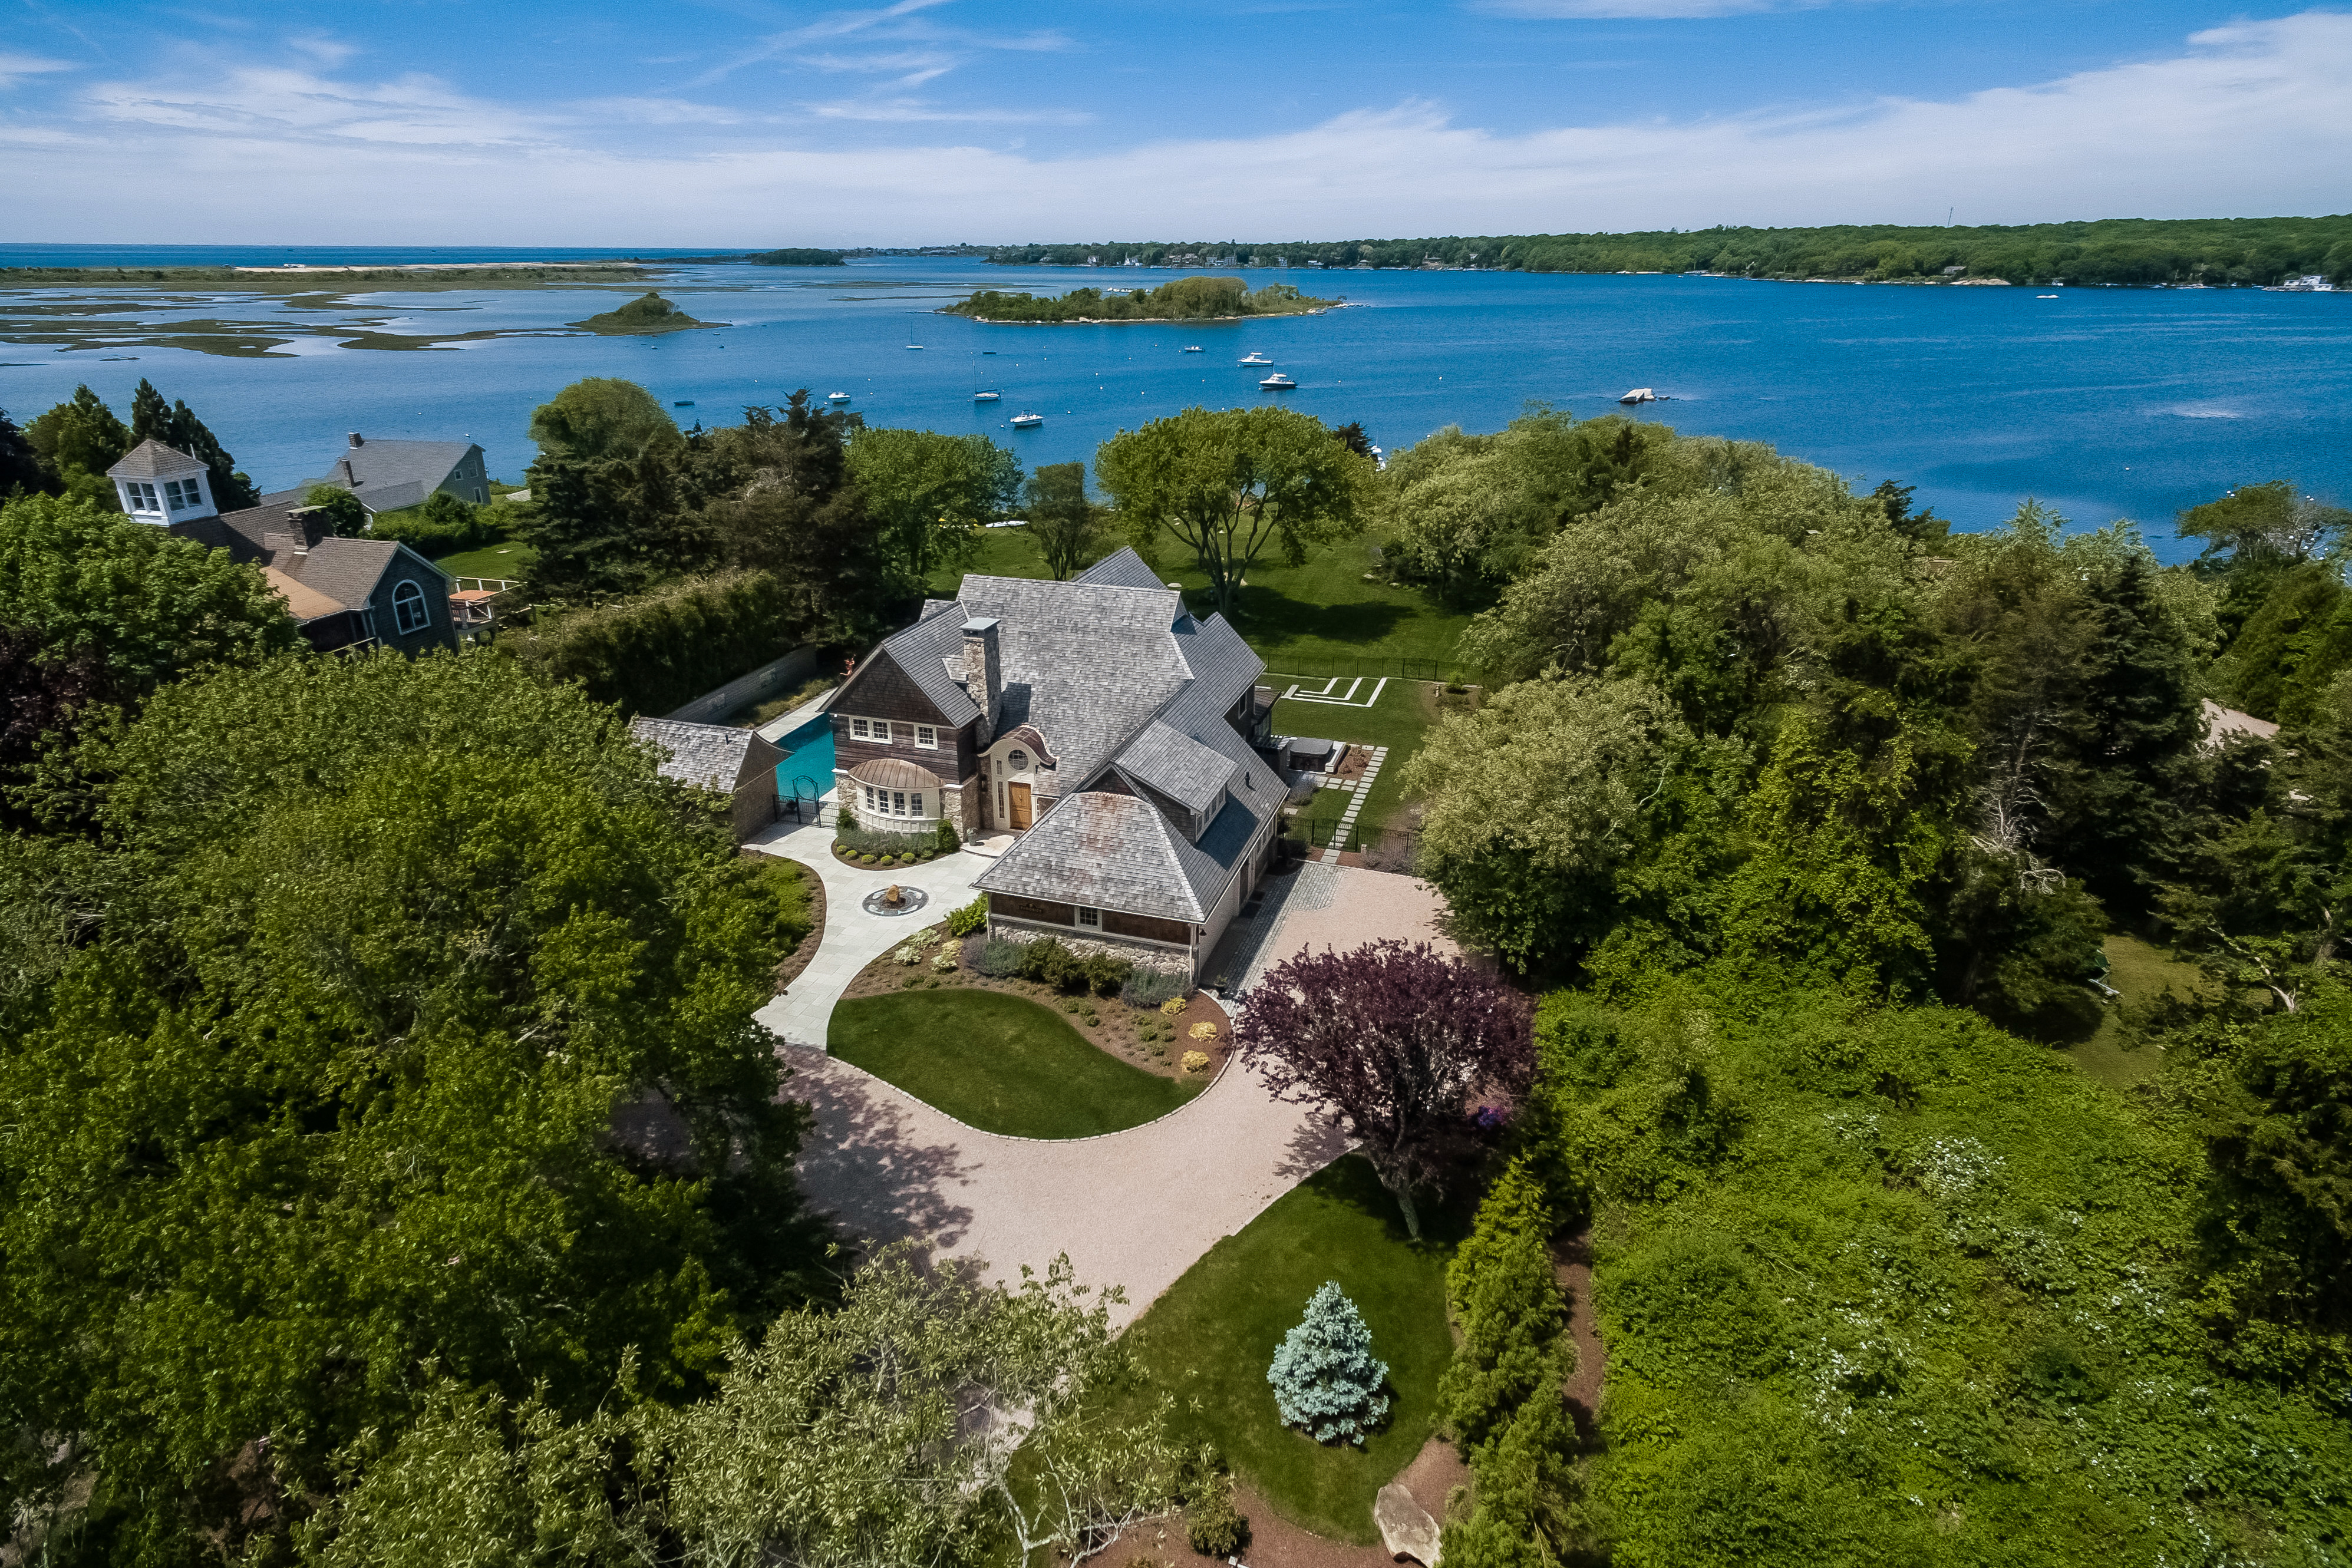 PRESS RELEASE: RECORD SALE IN CHARLESTOWN Waterfront Retreat in Quonochontaug Sells for $3.95M